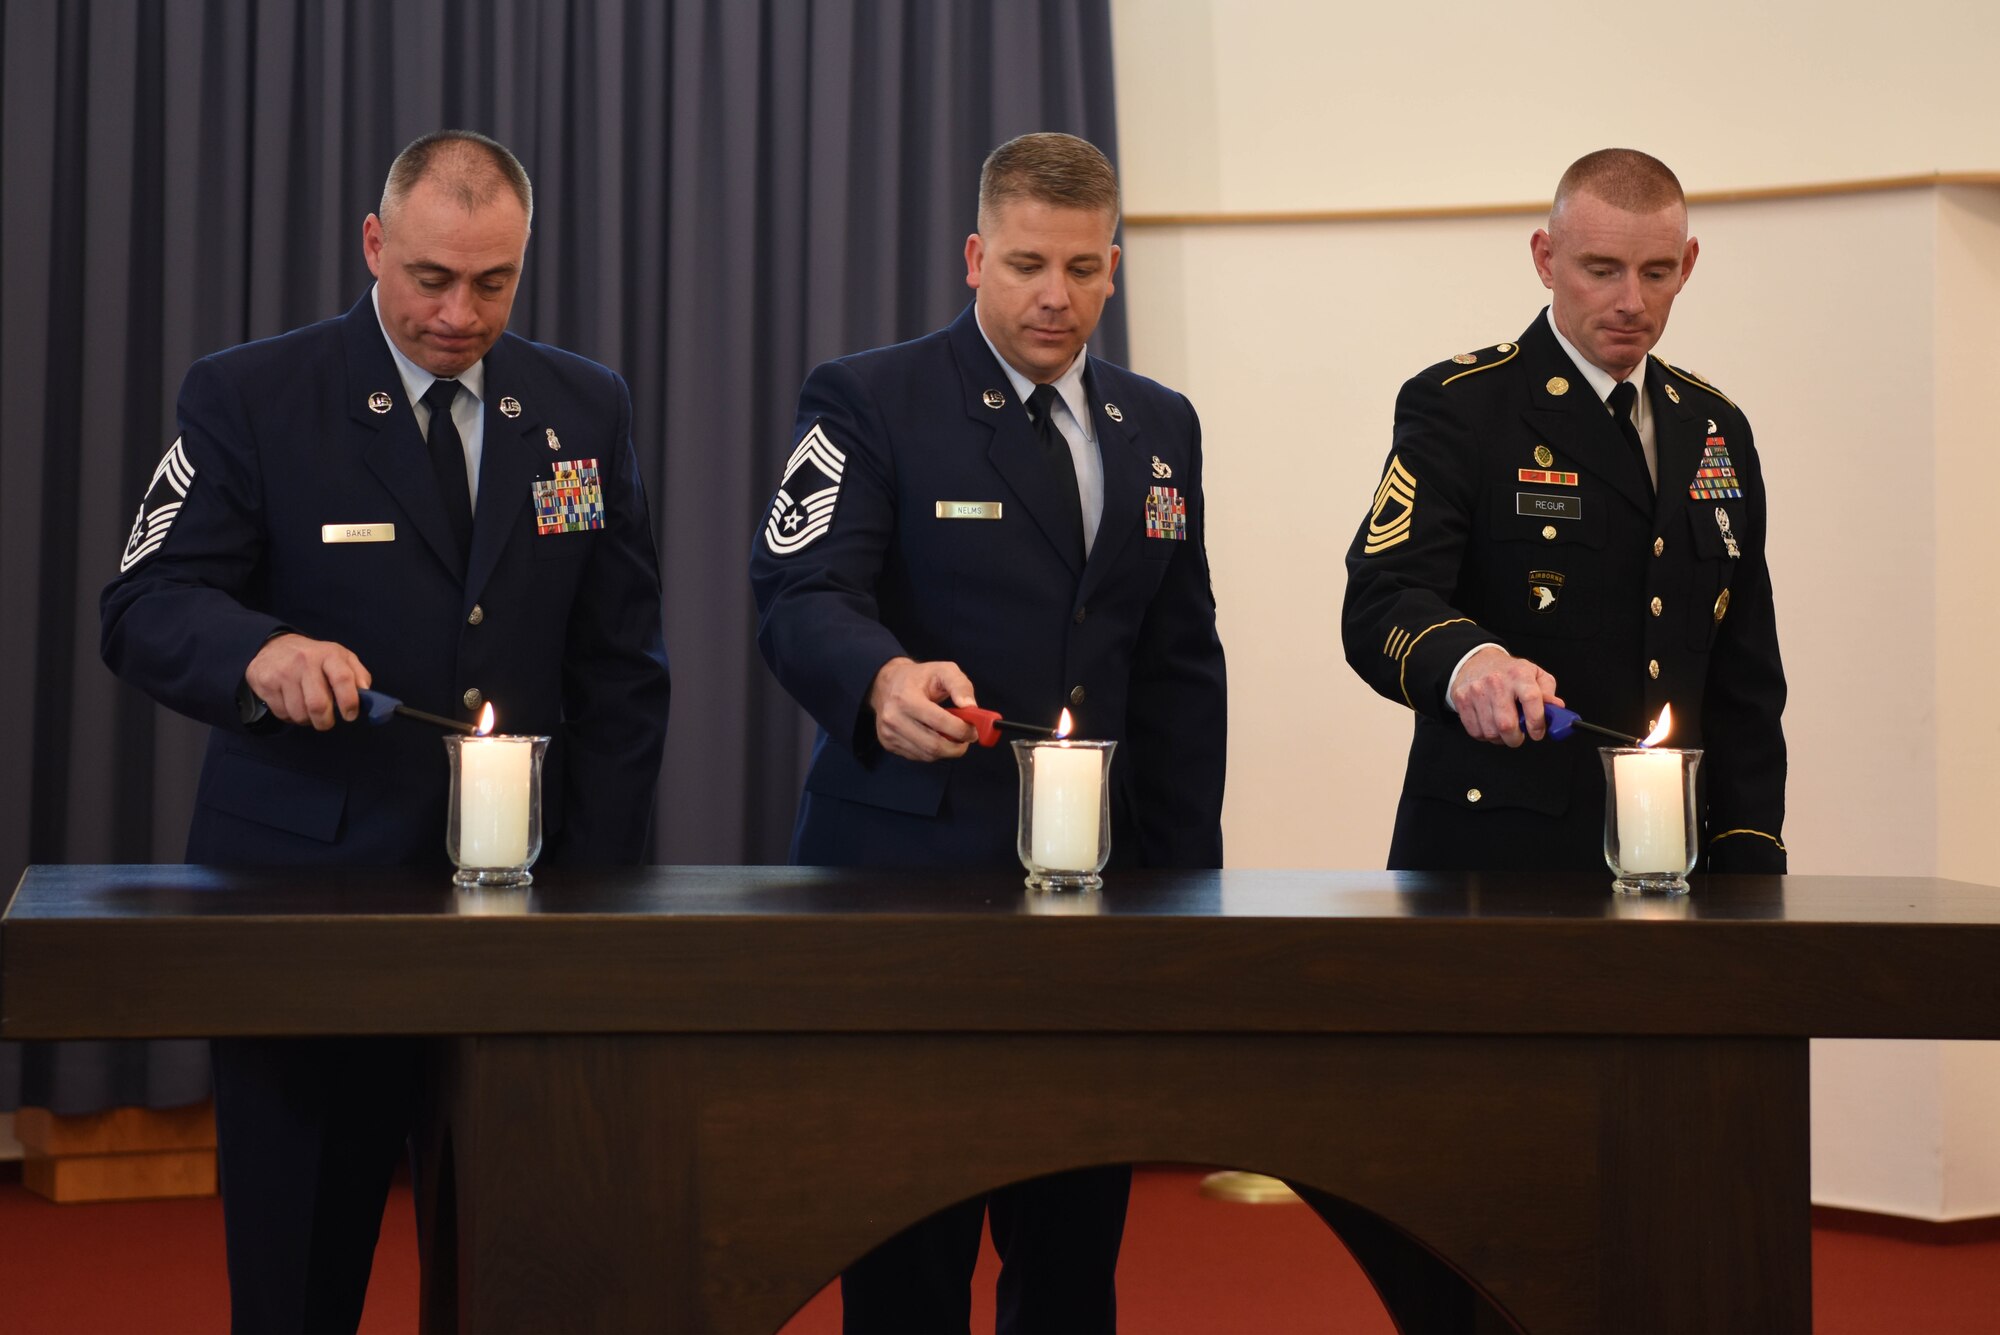 Members of the Ramstein Area Chief’s Group light candles during Kindergraves Memorial at Daenner Kaserne Chapel in Kaiserslautern, Germany, May 19, 2018. The Chief’s group is one of the organizations responsible for the up-keep of the gravesite.